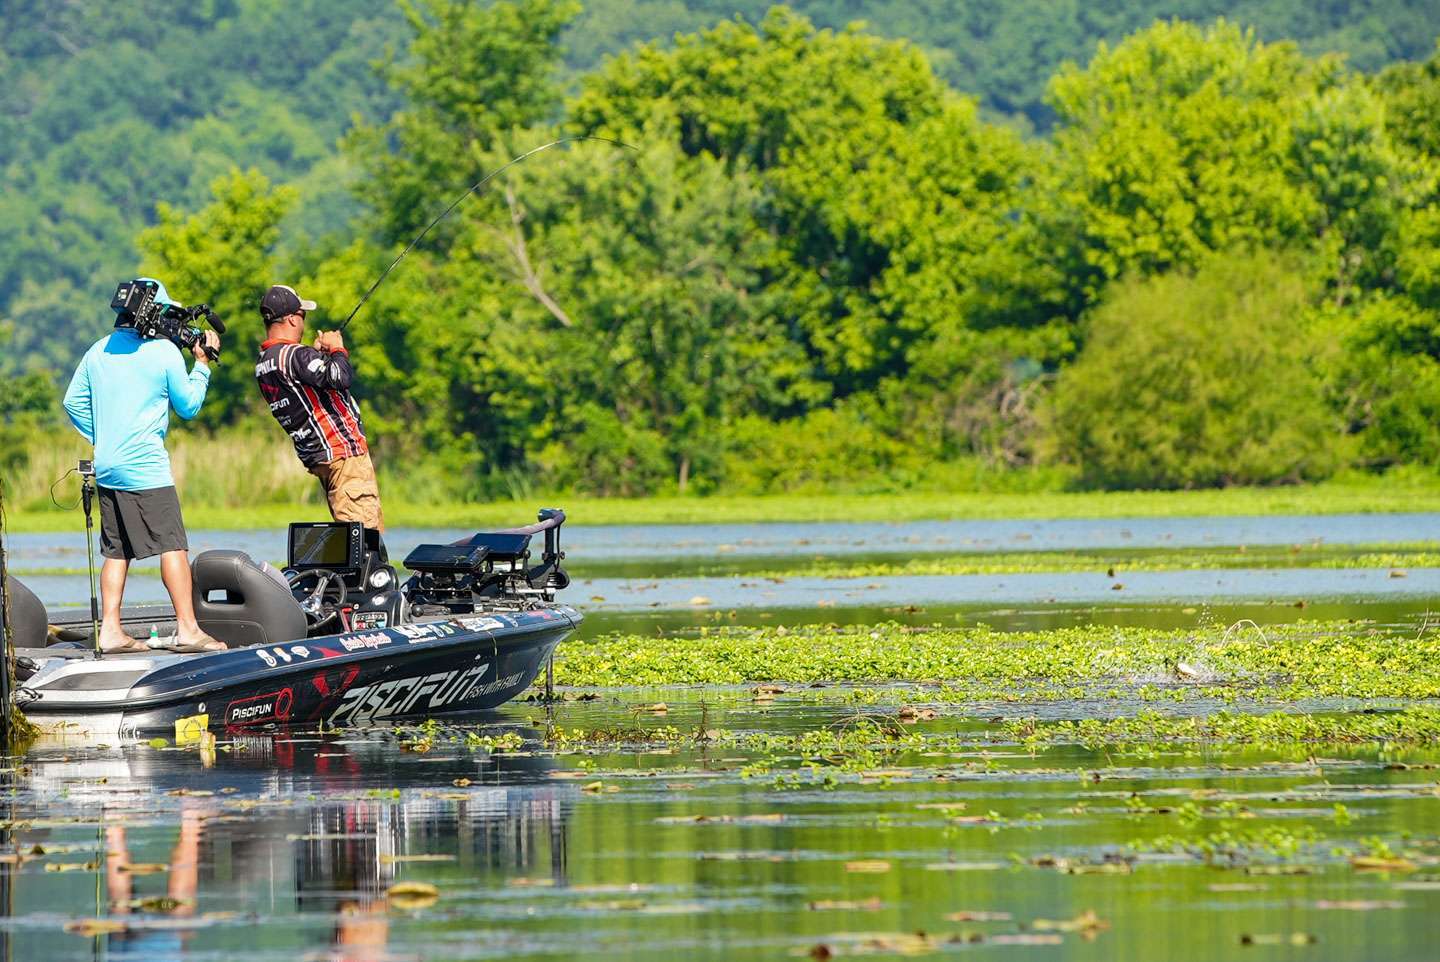 <b>Lake Guntersville</b><br>
You might say Wisconsin pro Caleb Kuphall clutched the win on Day 1 at Lake Guntersville when he weighed an eye-popping limit weighing 27-10. This limit anchored his winning weight of 85-14. Kuphallâs 17-14 margin of victory is the second largest in Elite Series history. 
